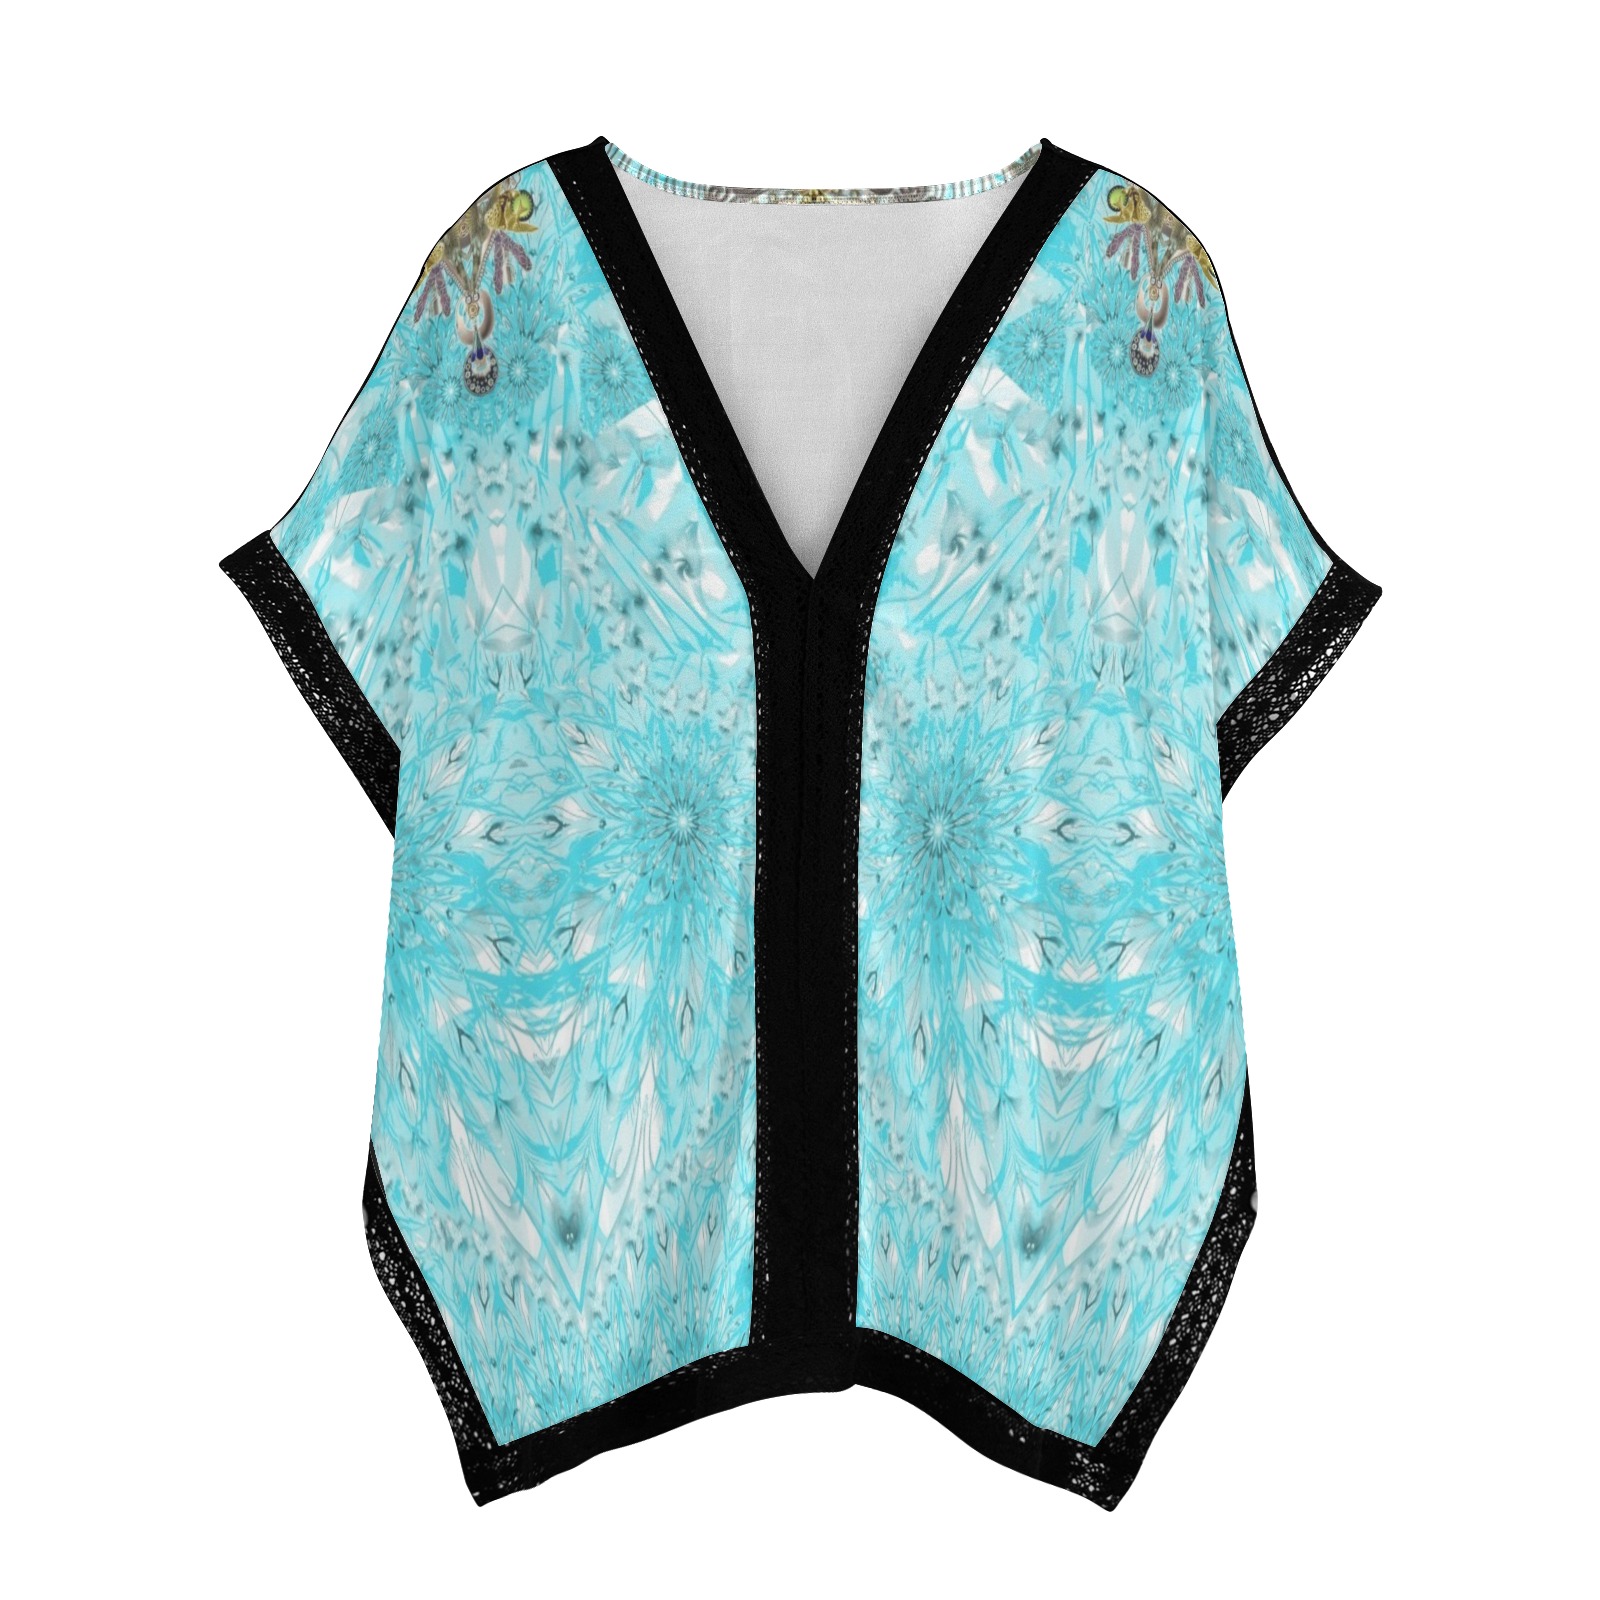 flowers and jewels Women's Beach Cover Ups